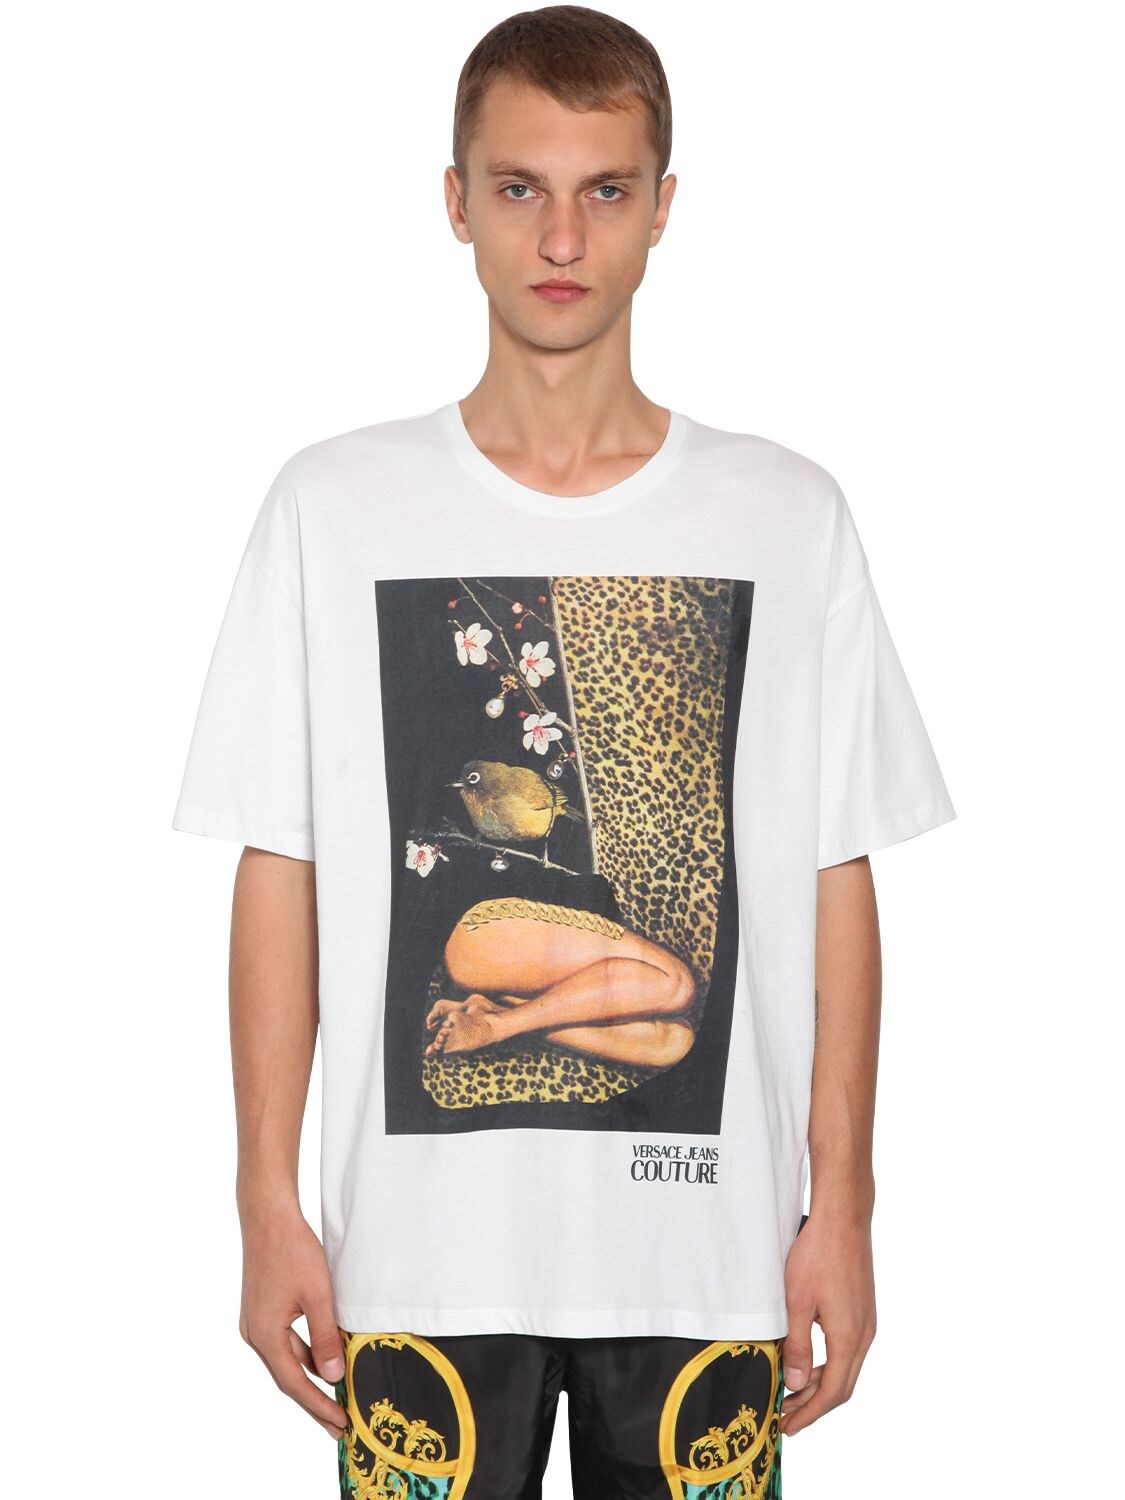 VERSACE JEANS COUTURE ROSA BURGESS T-SHIRT,71IBQN004-MDAZ0